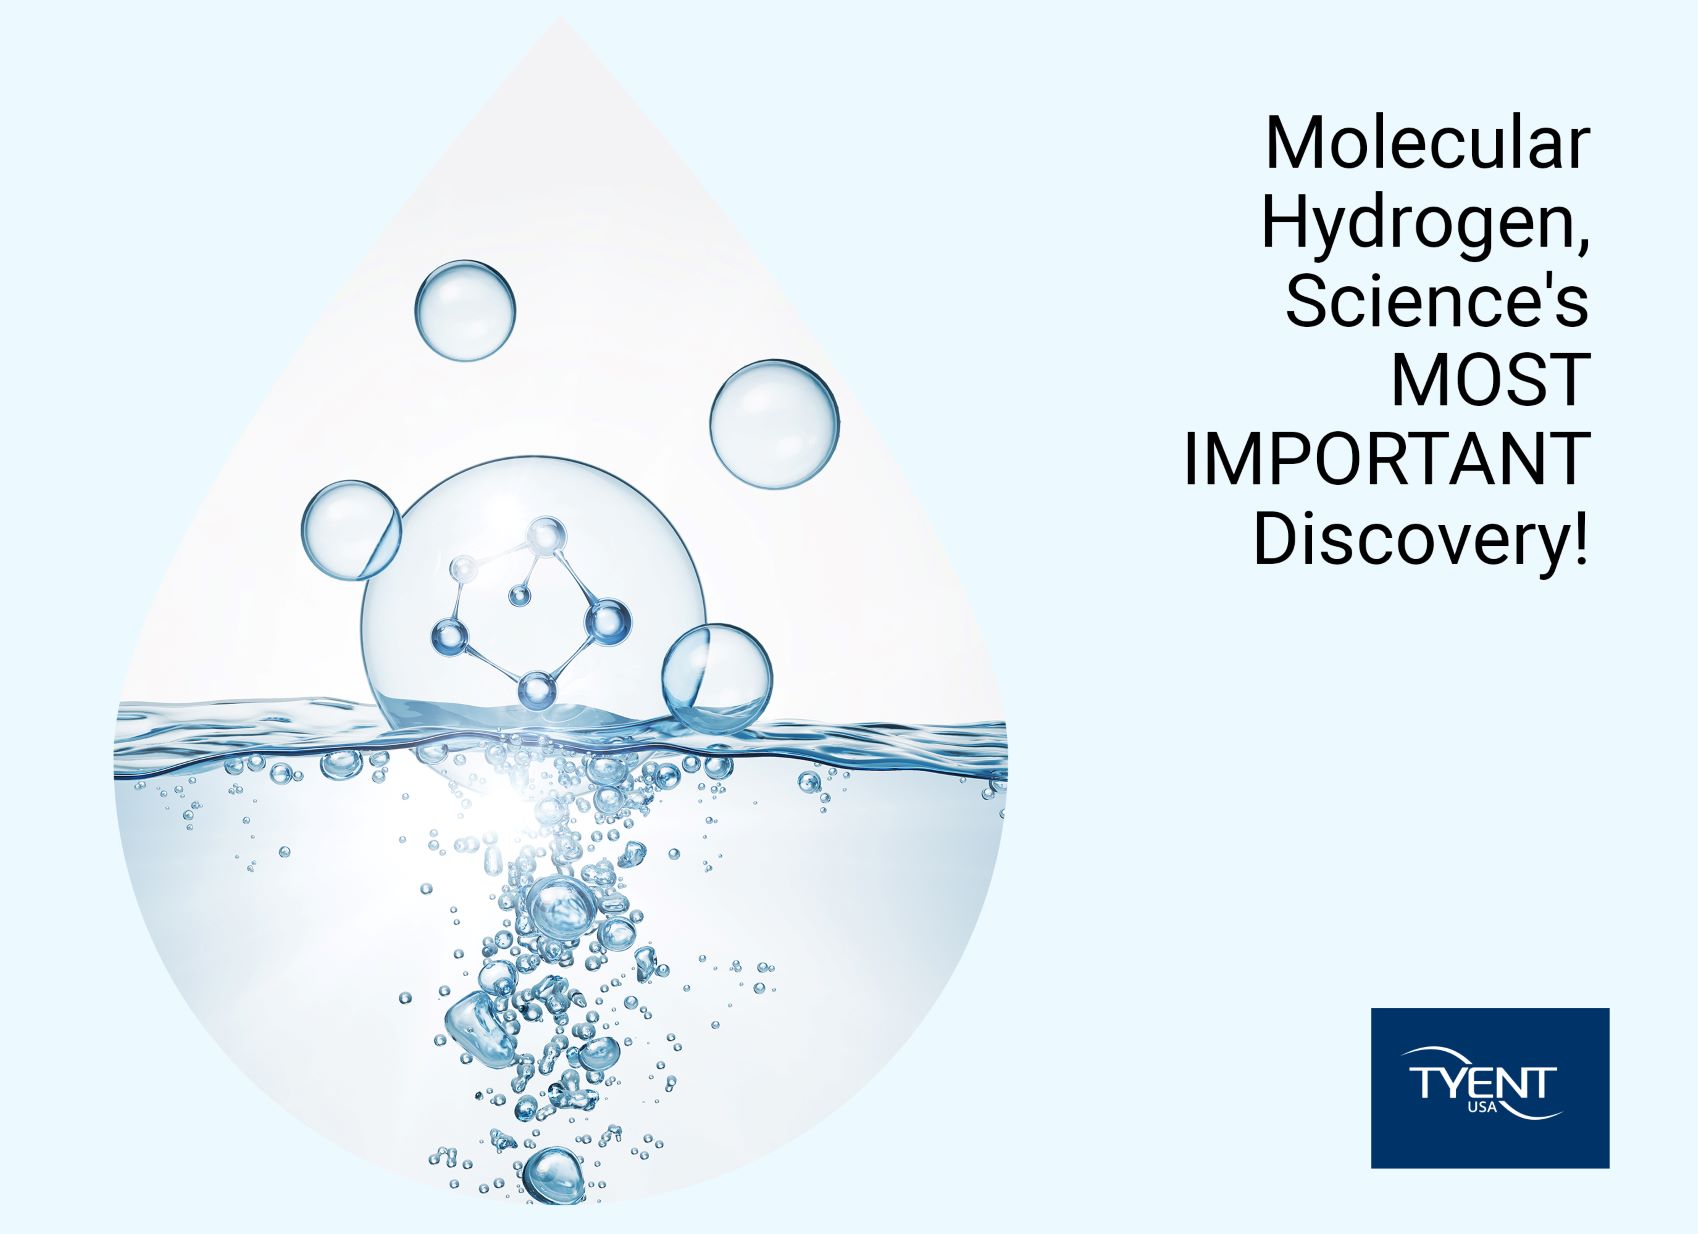 Molecular Hydrogen, Science's MOST IMPORTANT Discovery!